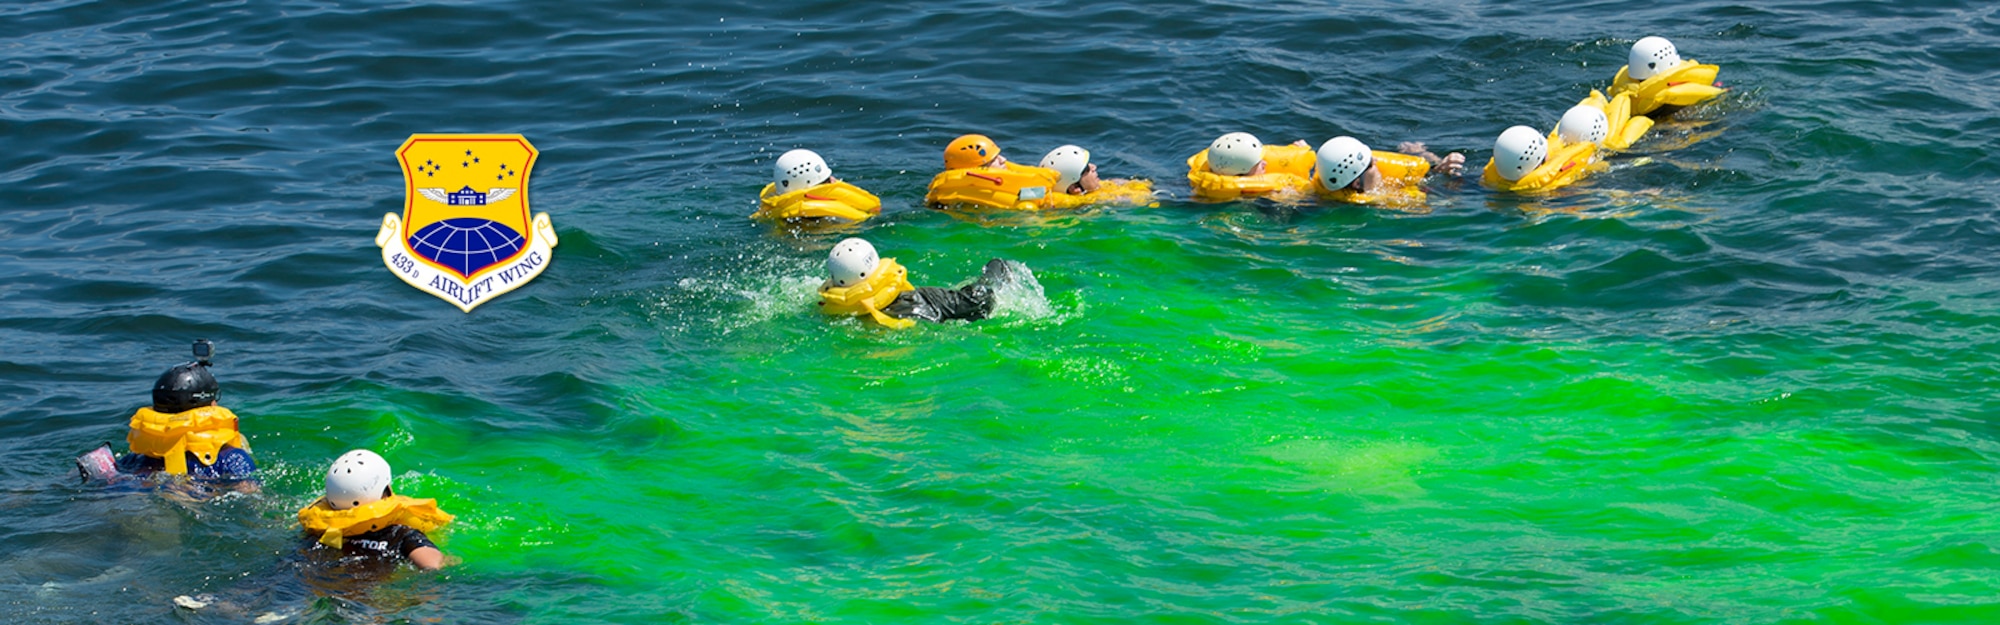 Airmen from the 433rd Airlift Wing, Joint Base San Antonio conduct water survival training during Exercise Alamo Express in the Gulf of Mexico, Sept. 17, 2016. Alamo Express is the 433rd AW’s premier training exercise that prepares Airmen for real-world situations. During the exercise, aircrew will conduct land and water survival training, cargo uploading and downloading, communications, aerial port procedures, transportation and oversight of the total air mobility process. (U.S. Air Force photo by Staff Sgt. Matthew B. Fredericks)